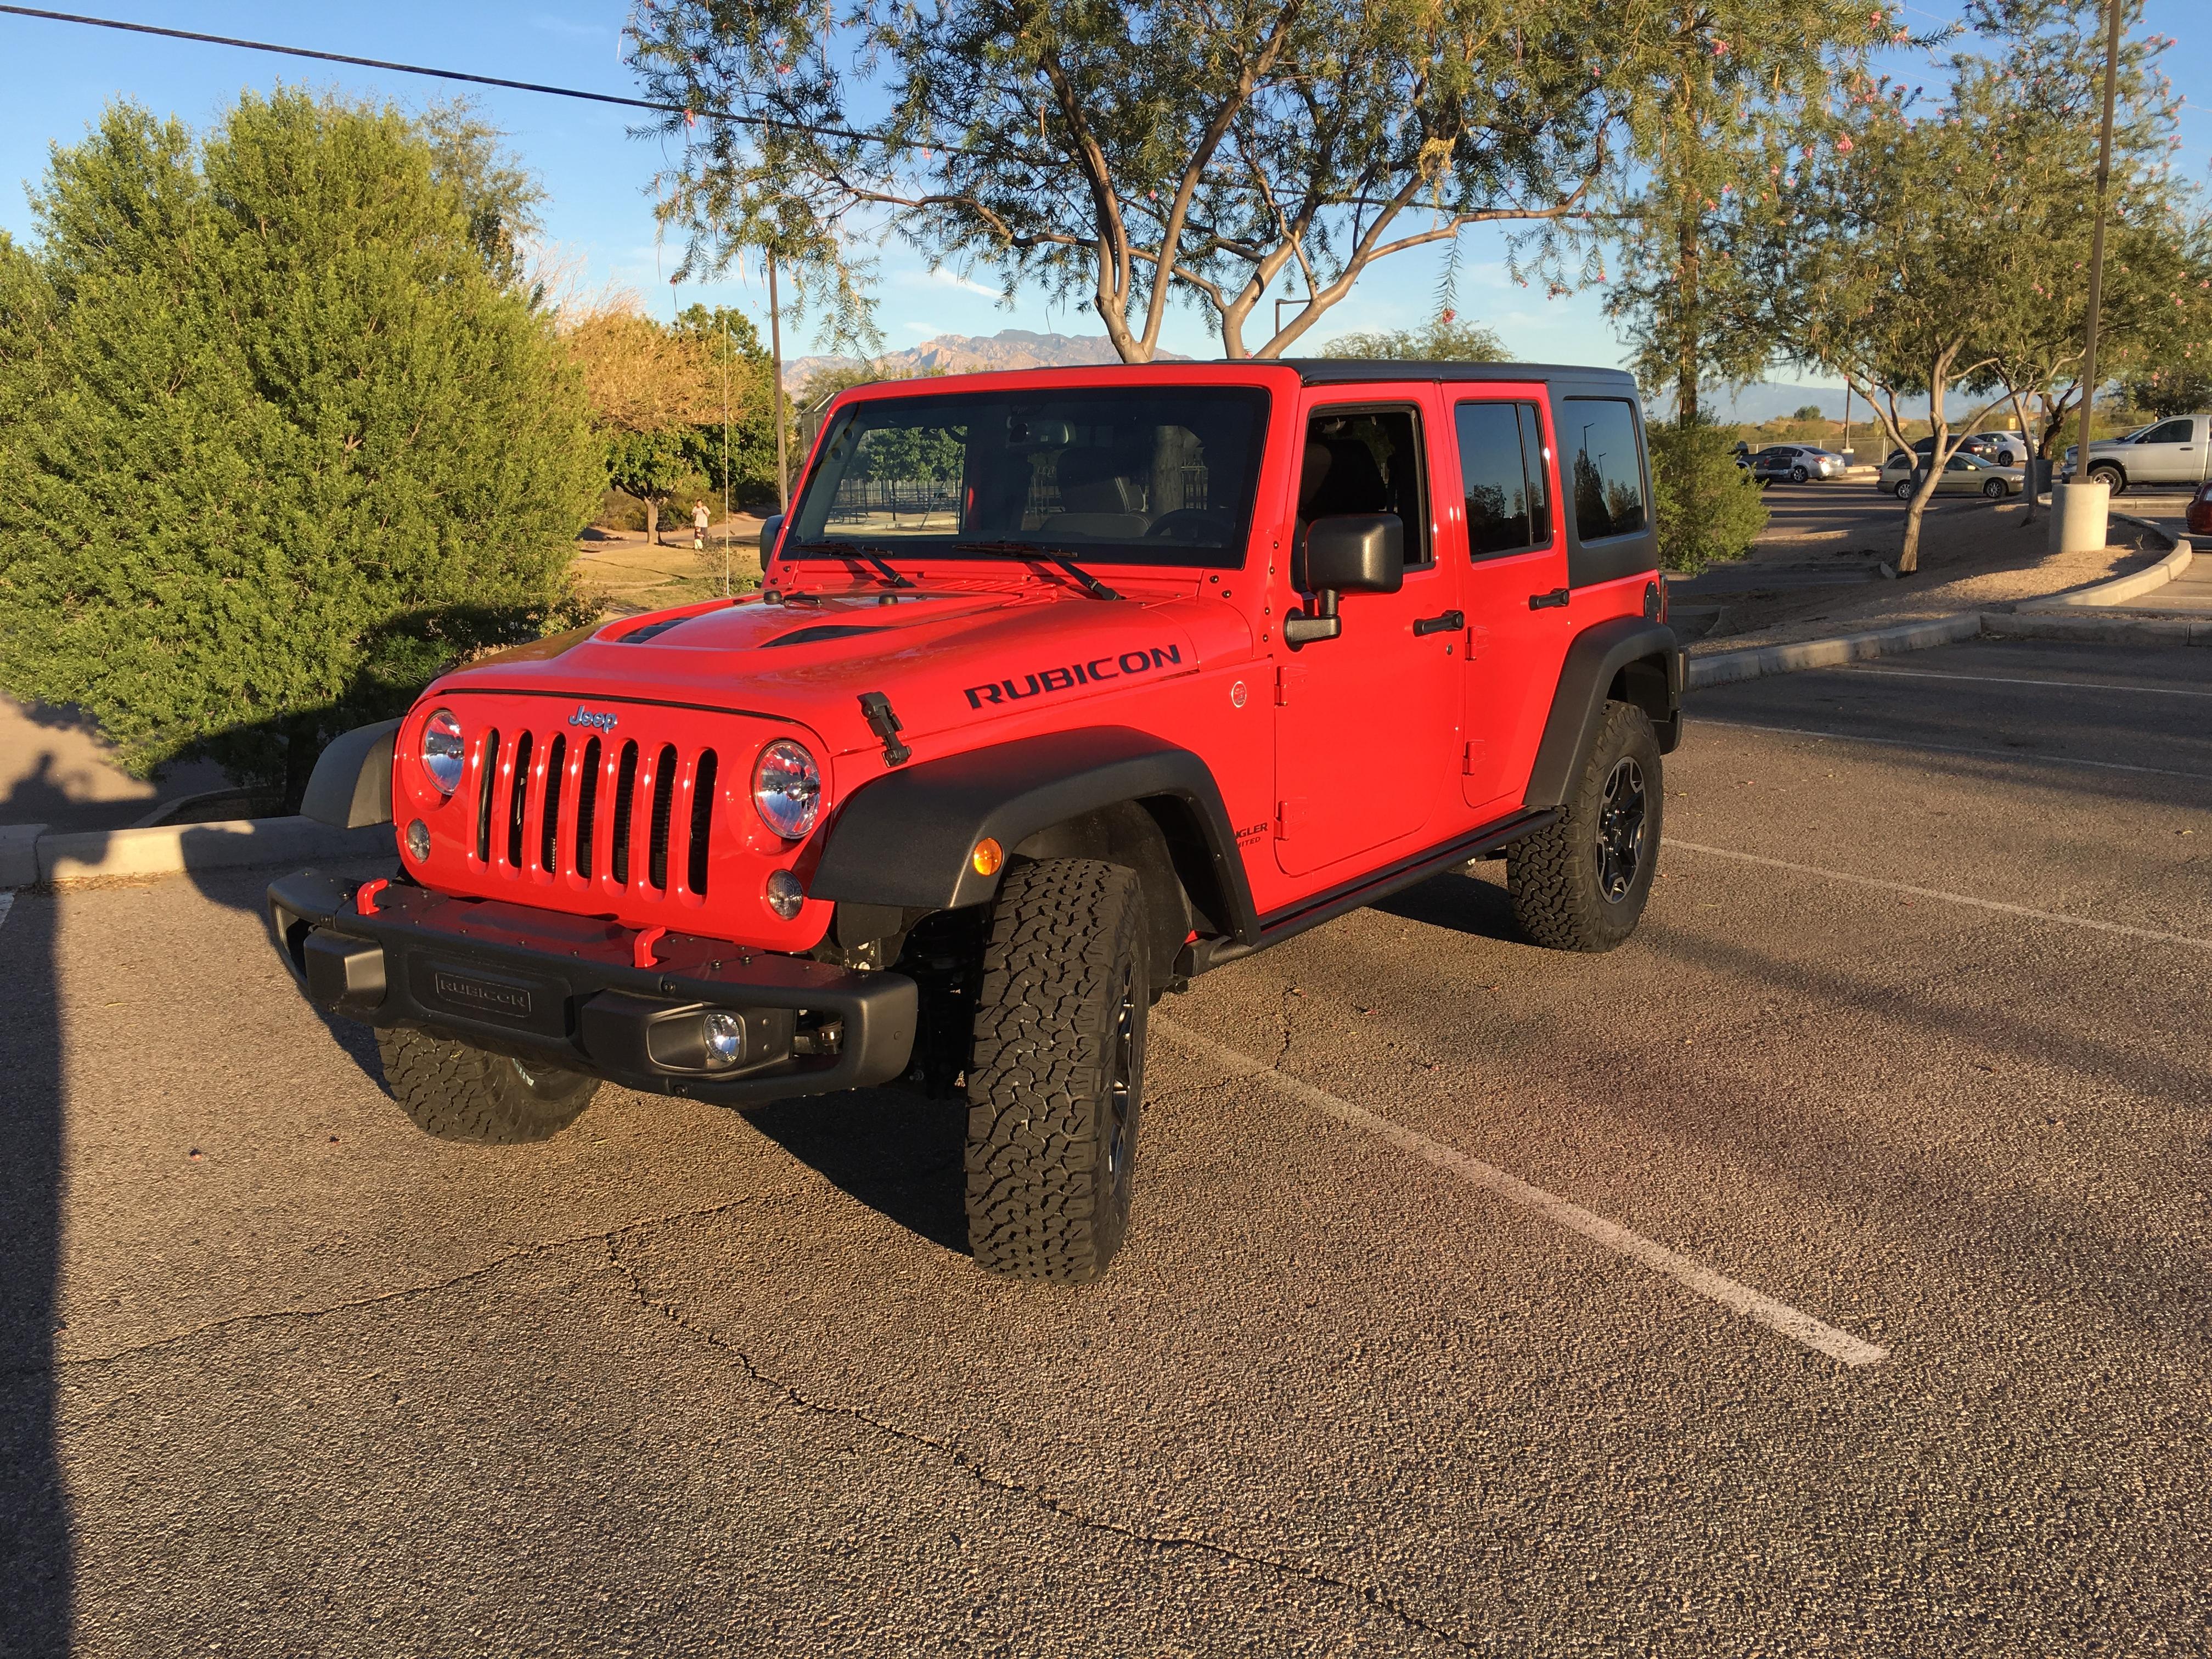 275/70R17 Pics?  - The top destination for Jeep JK and JL  Wrangler news, rumors, and discussion